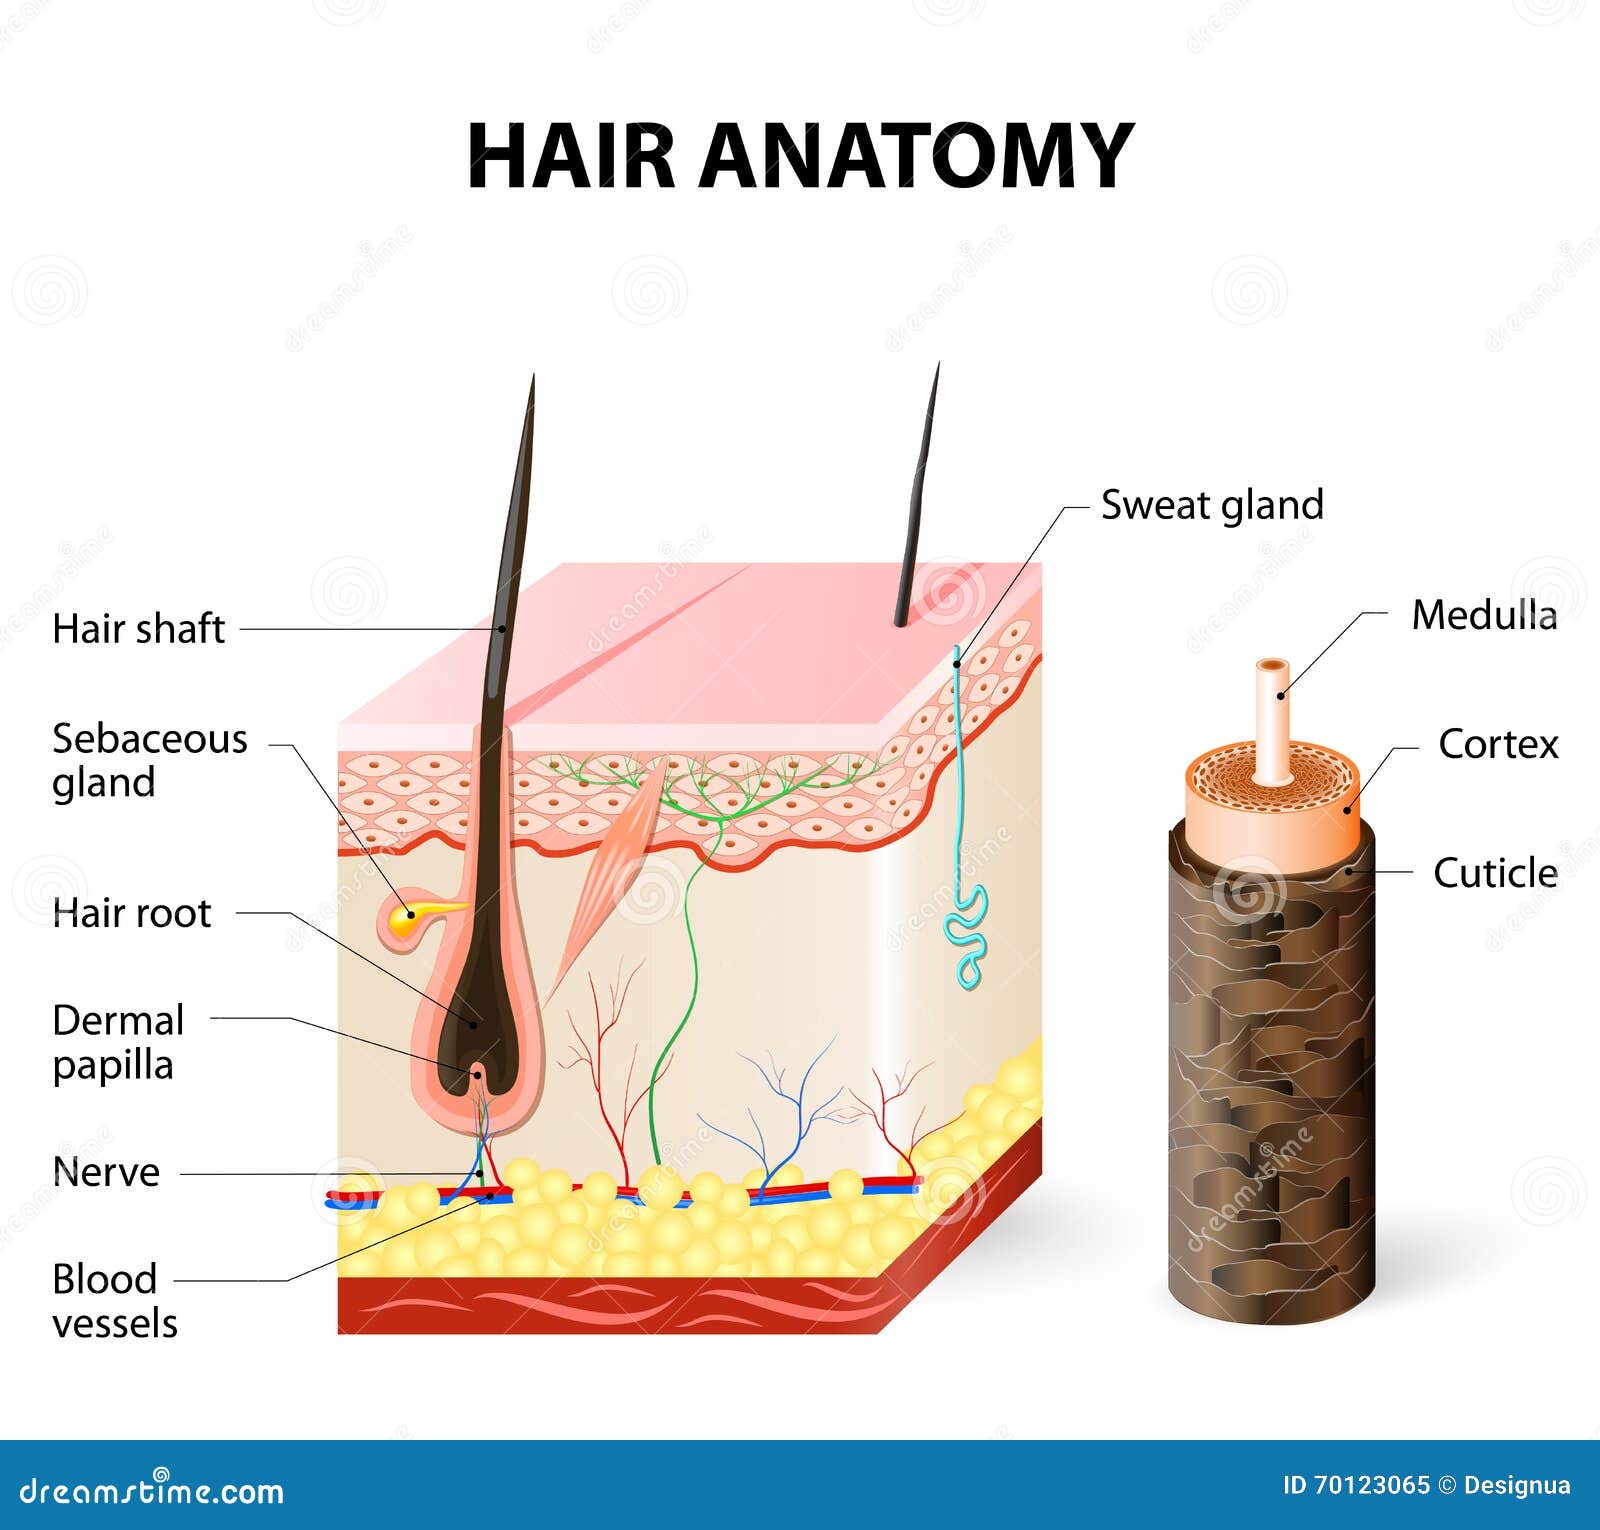 Diagram Of A Hair Follicle In A Cross Section Of Skin Layers Stock Vector Illustration Of Cortex Medulla